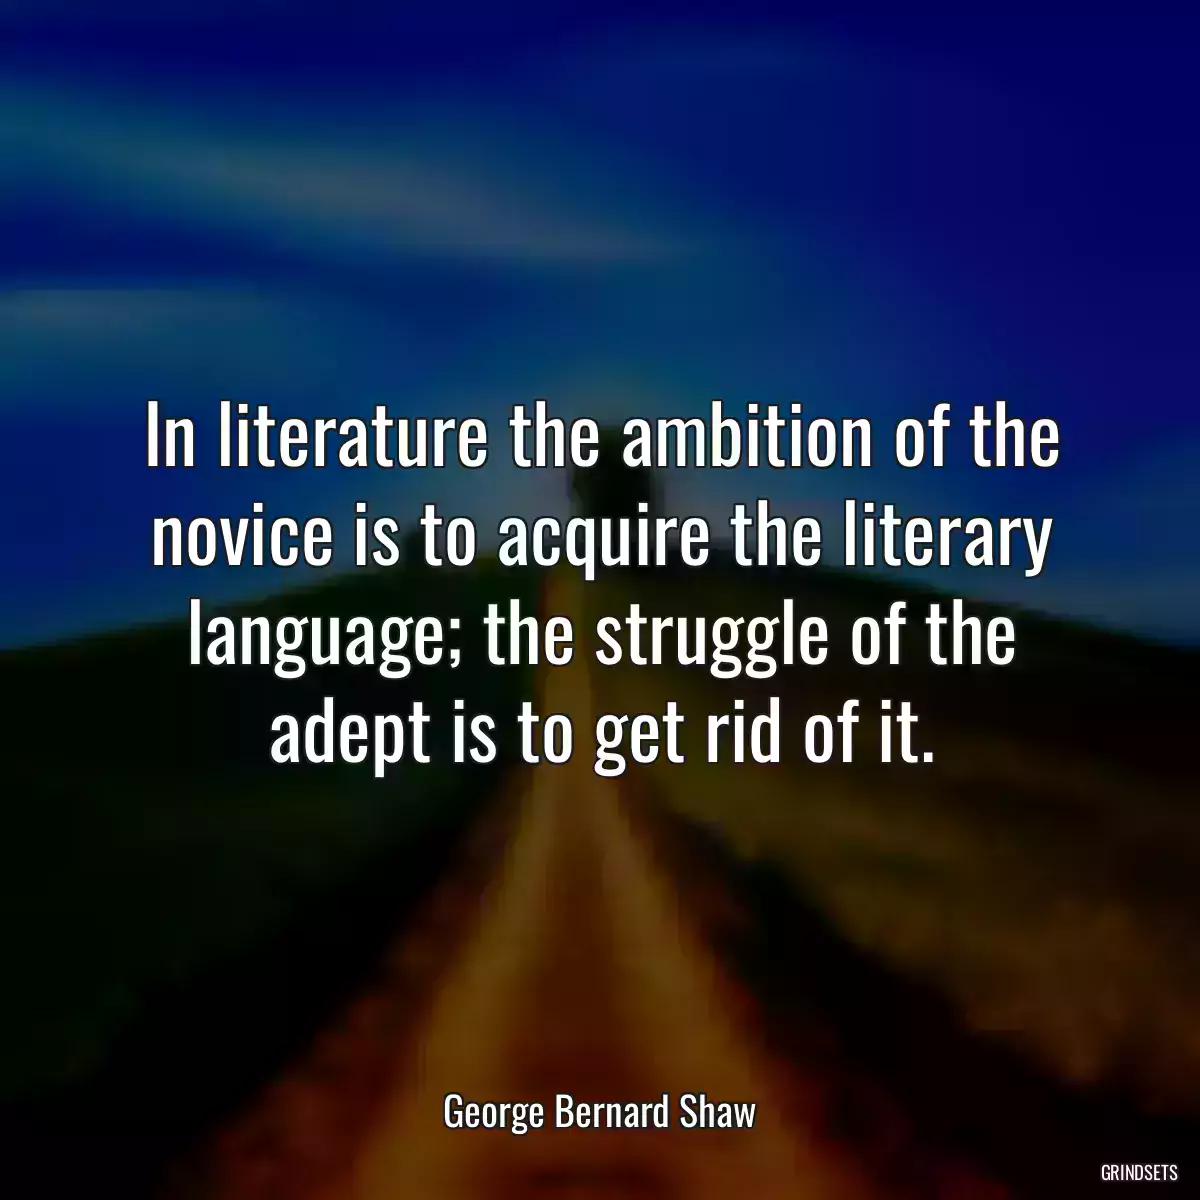 In literature the ambition of the novice is to acquire the literary language; the struggle of the adept is to get rid of it.